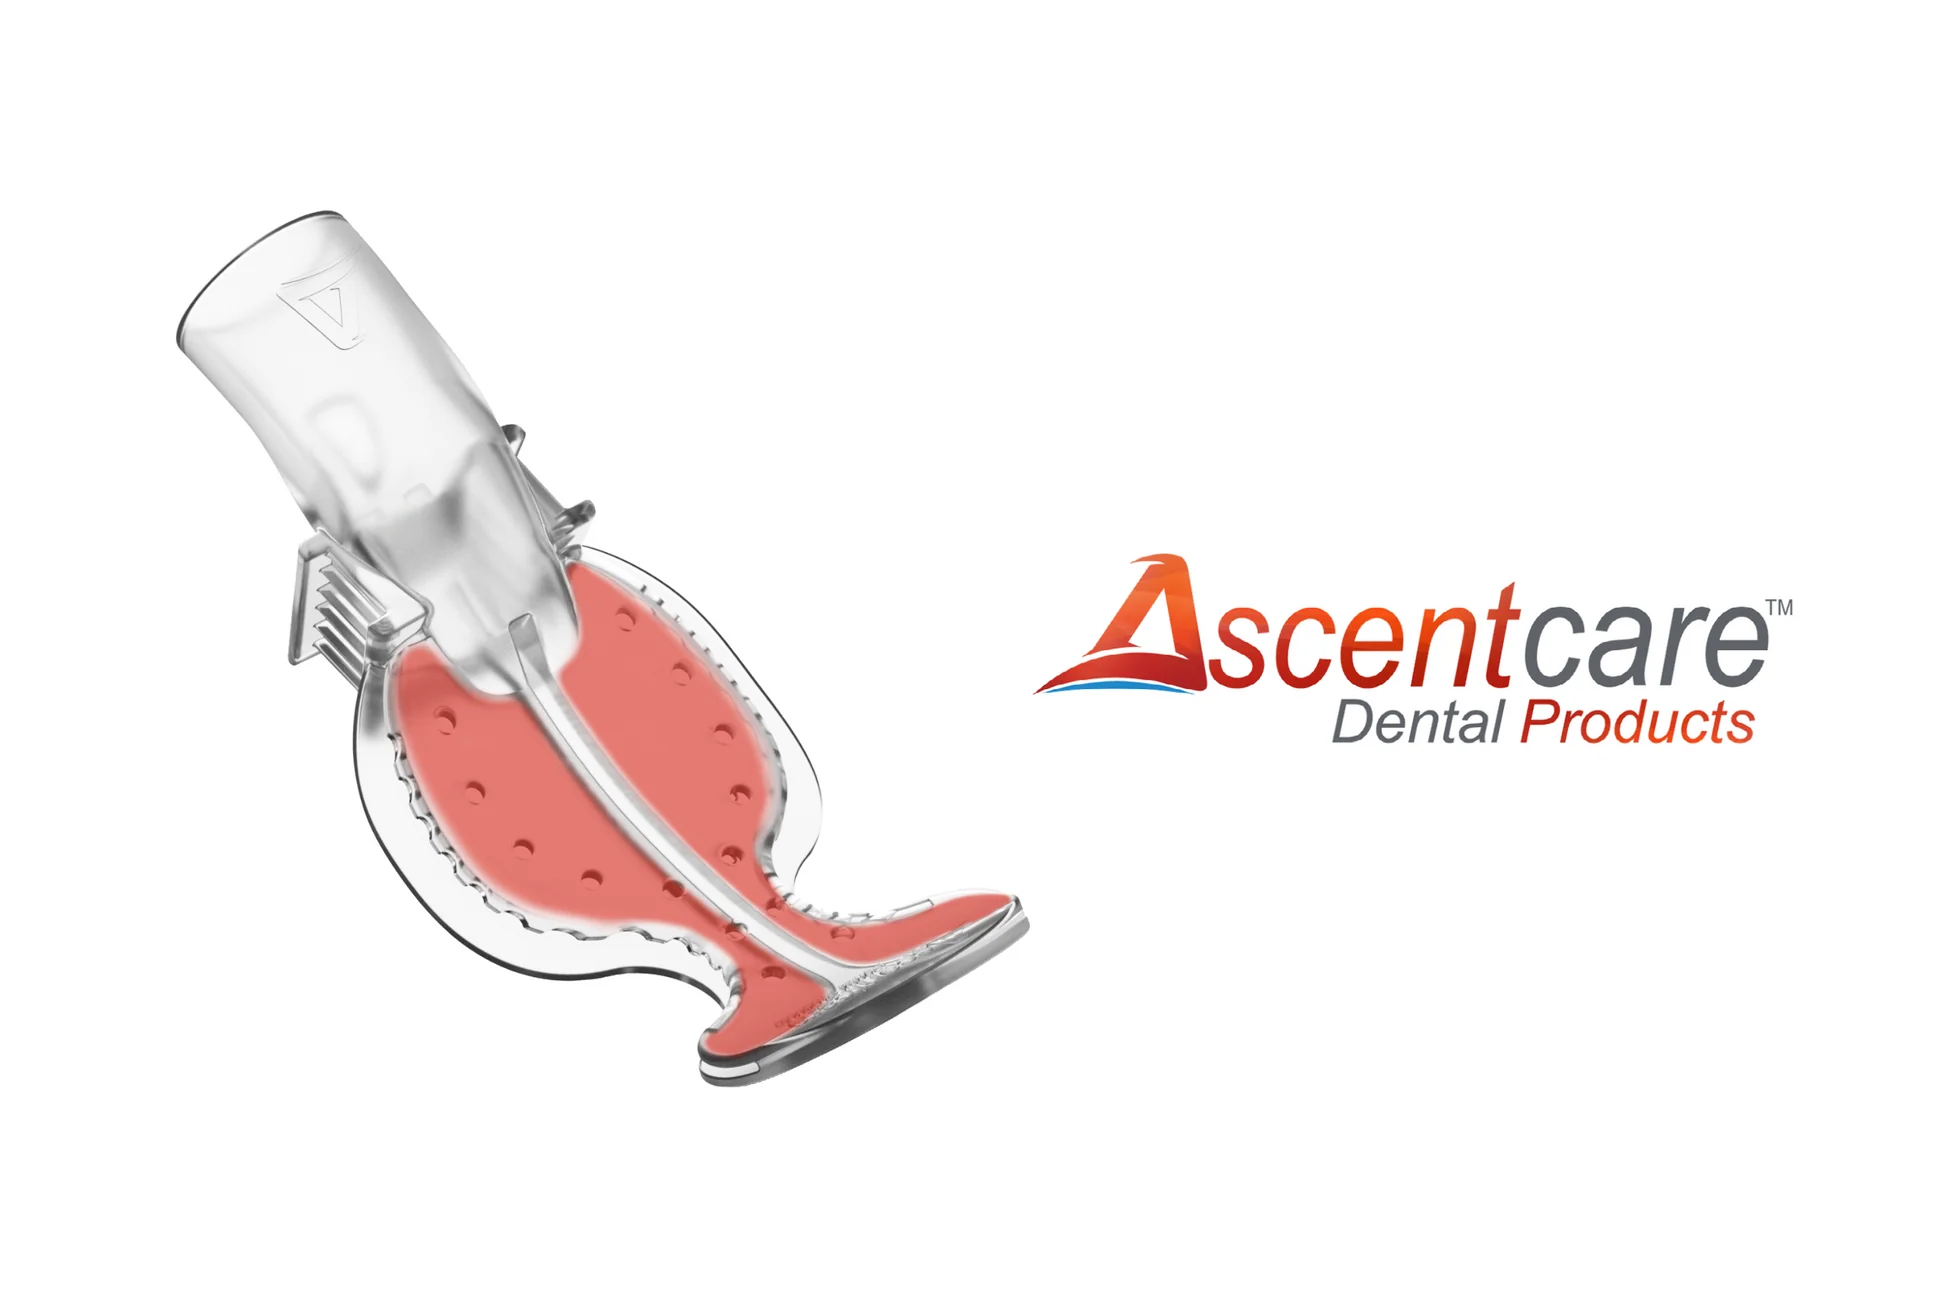 Ascentcare Dental Products